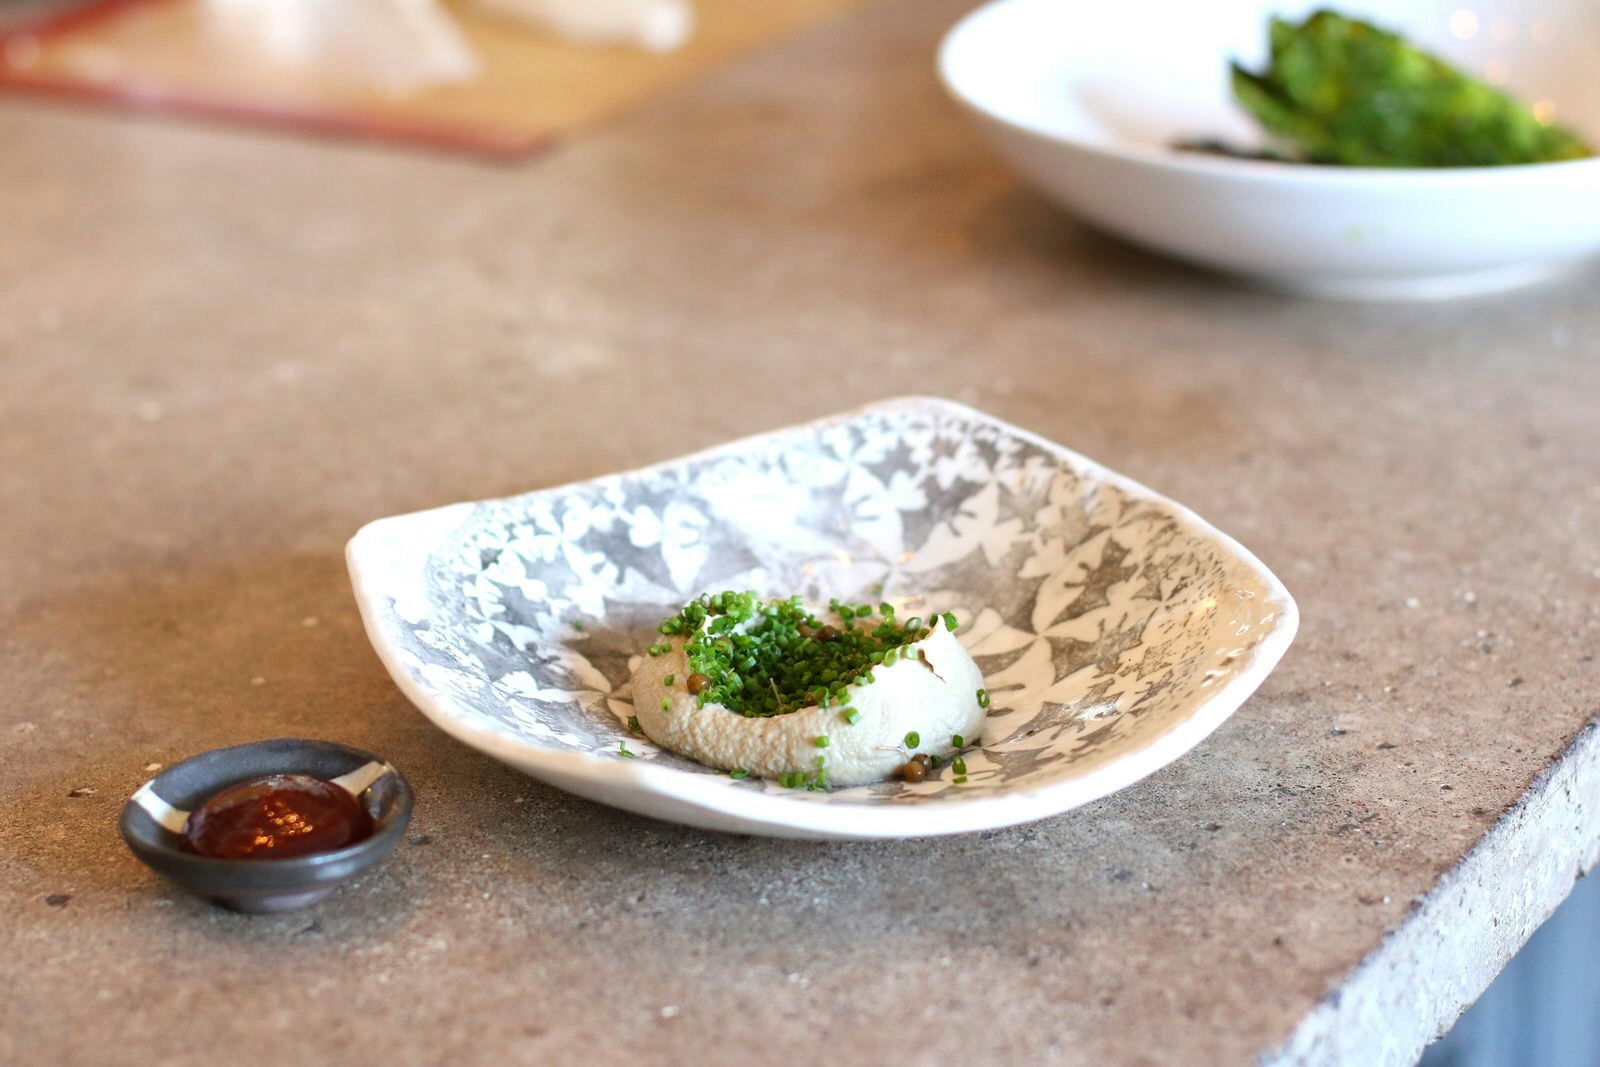 A close up of a truckle of goats cheese, covered in herbs and served in a hand-crafted dish.